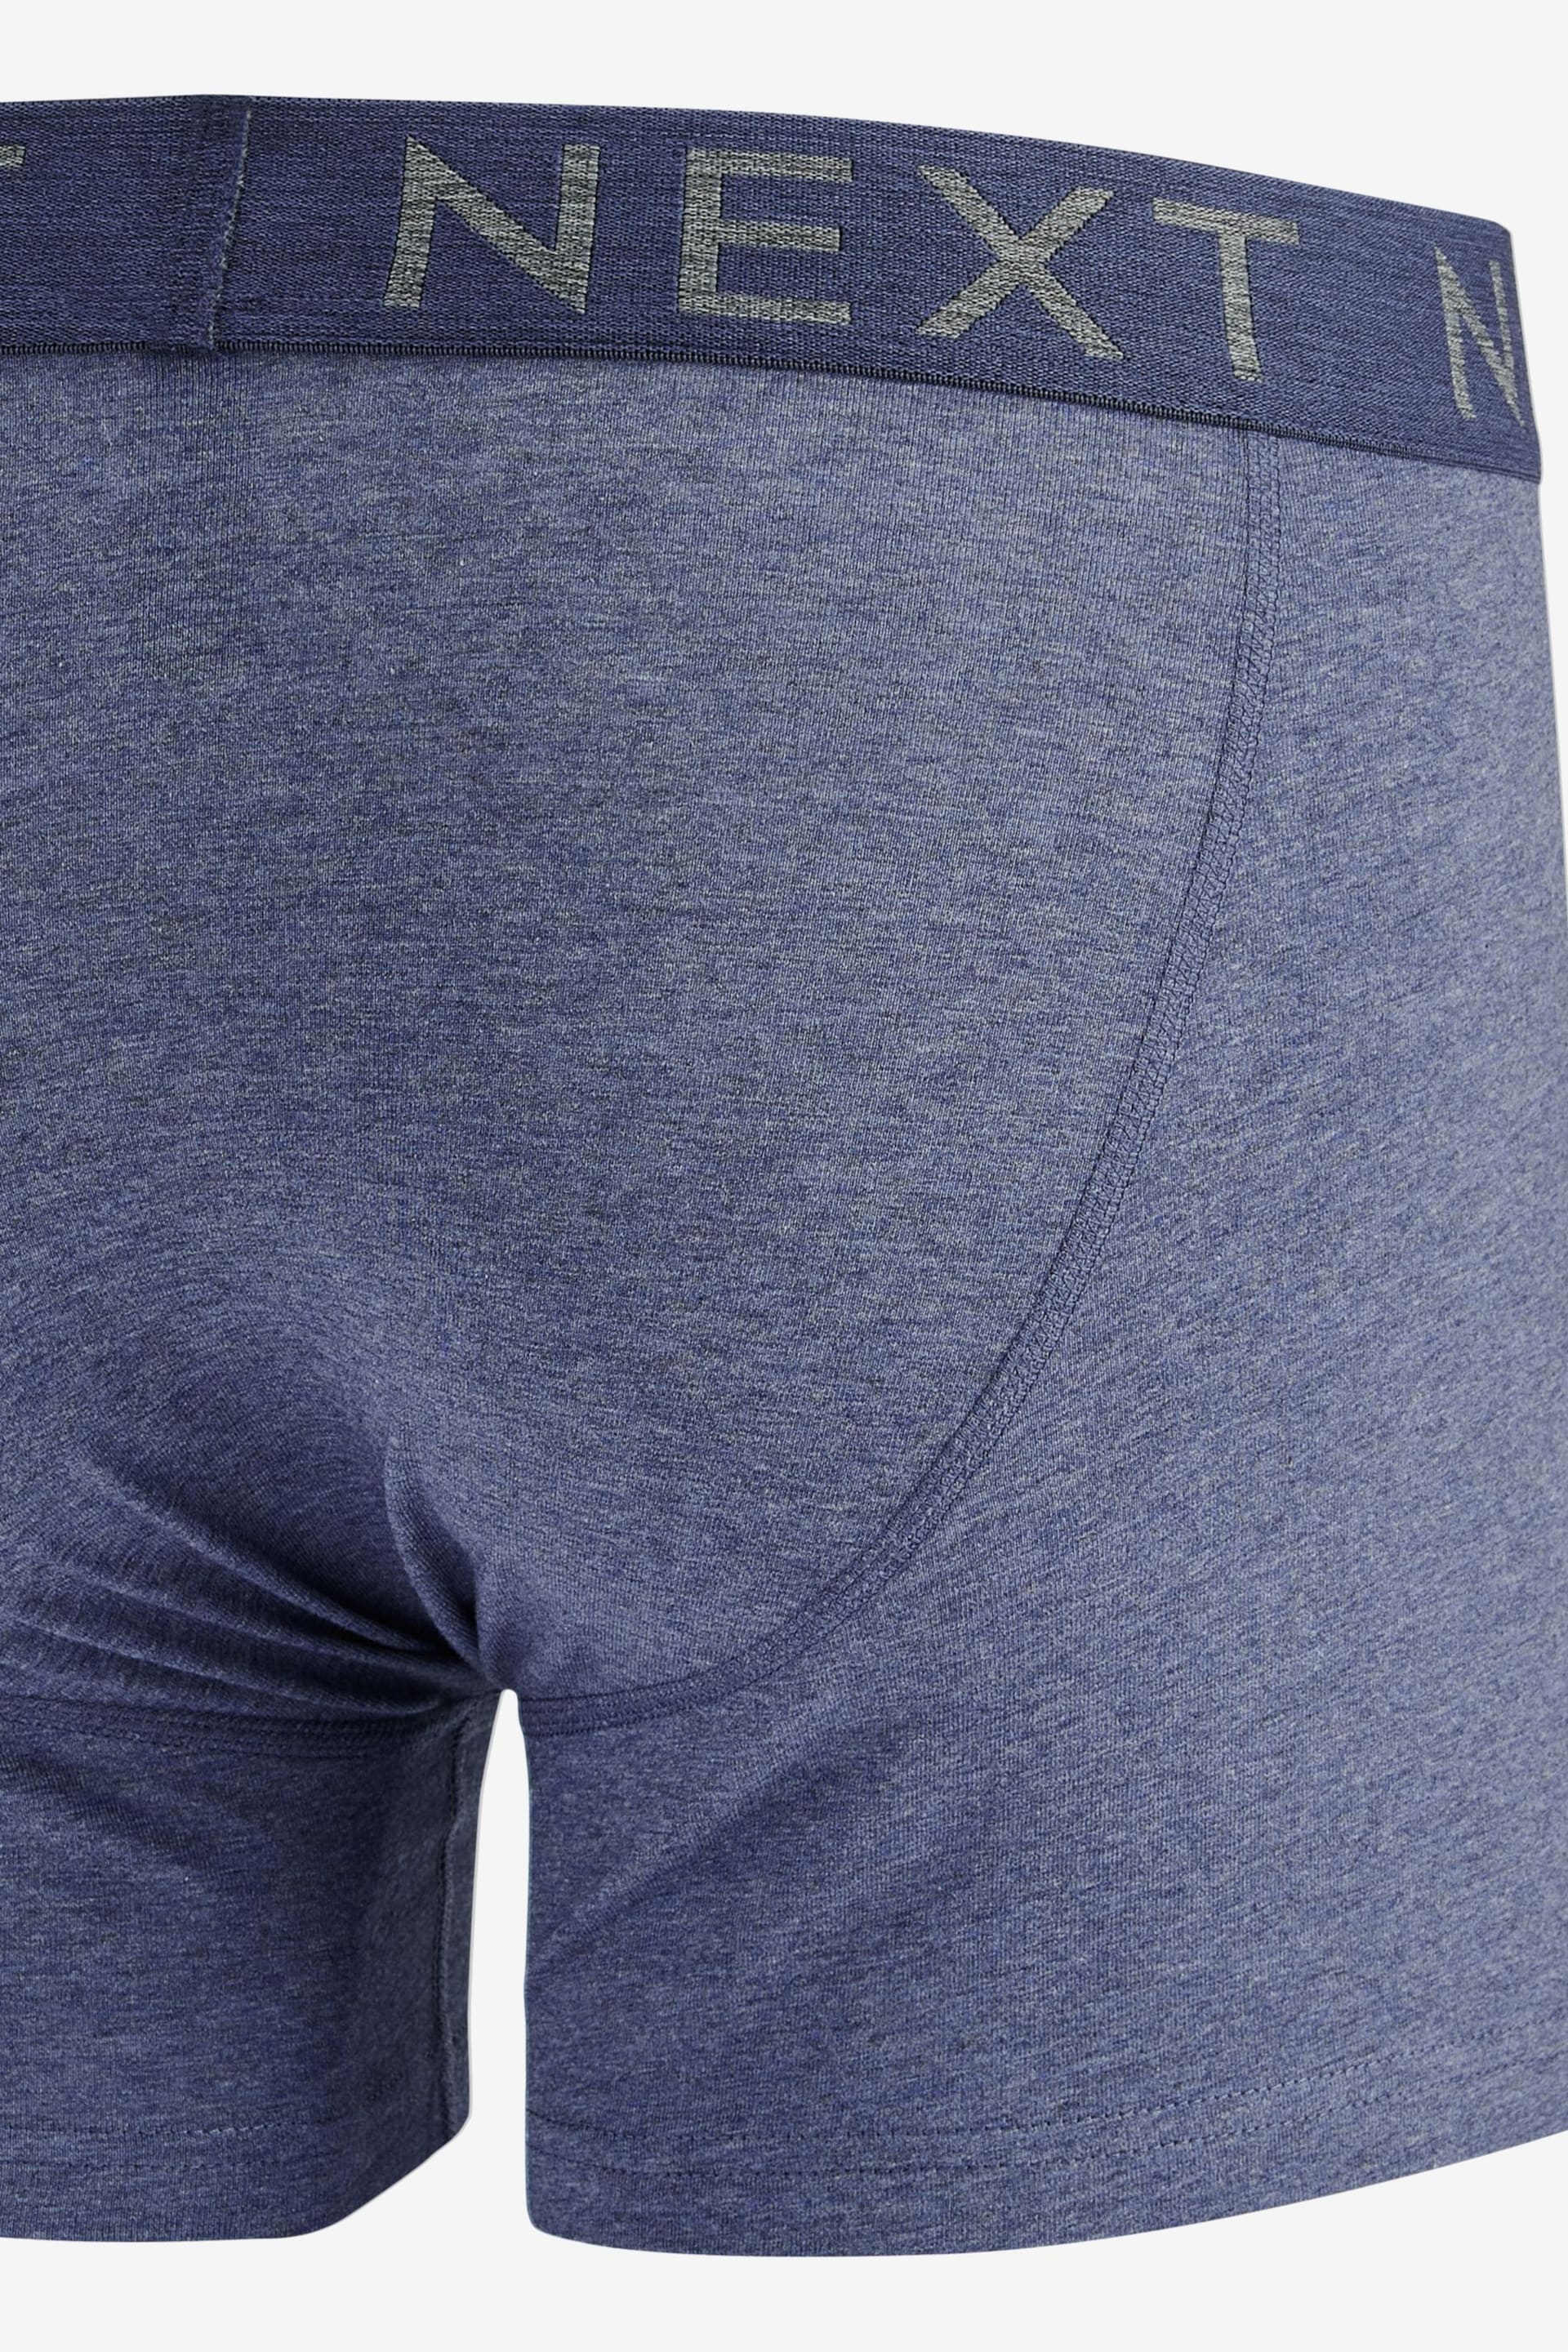 Blue 4 pack A-Front Boxers - Image 6 of 7